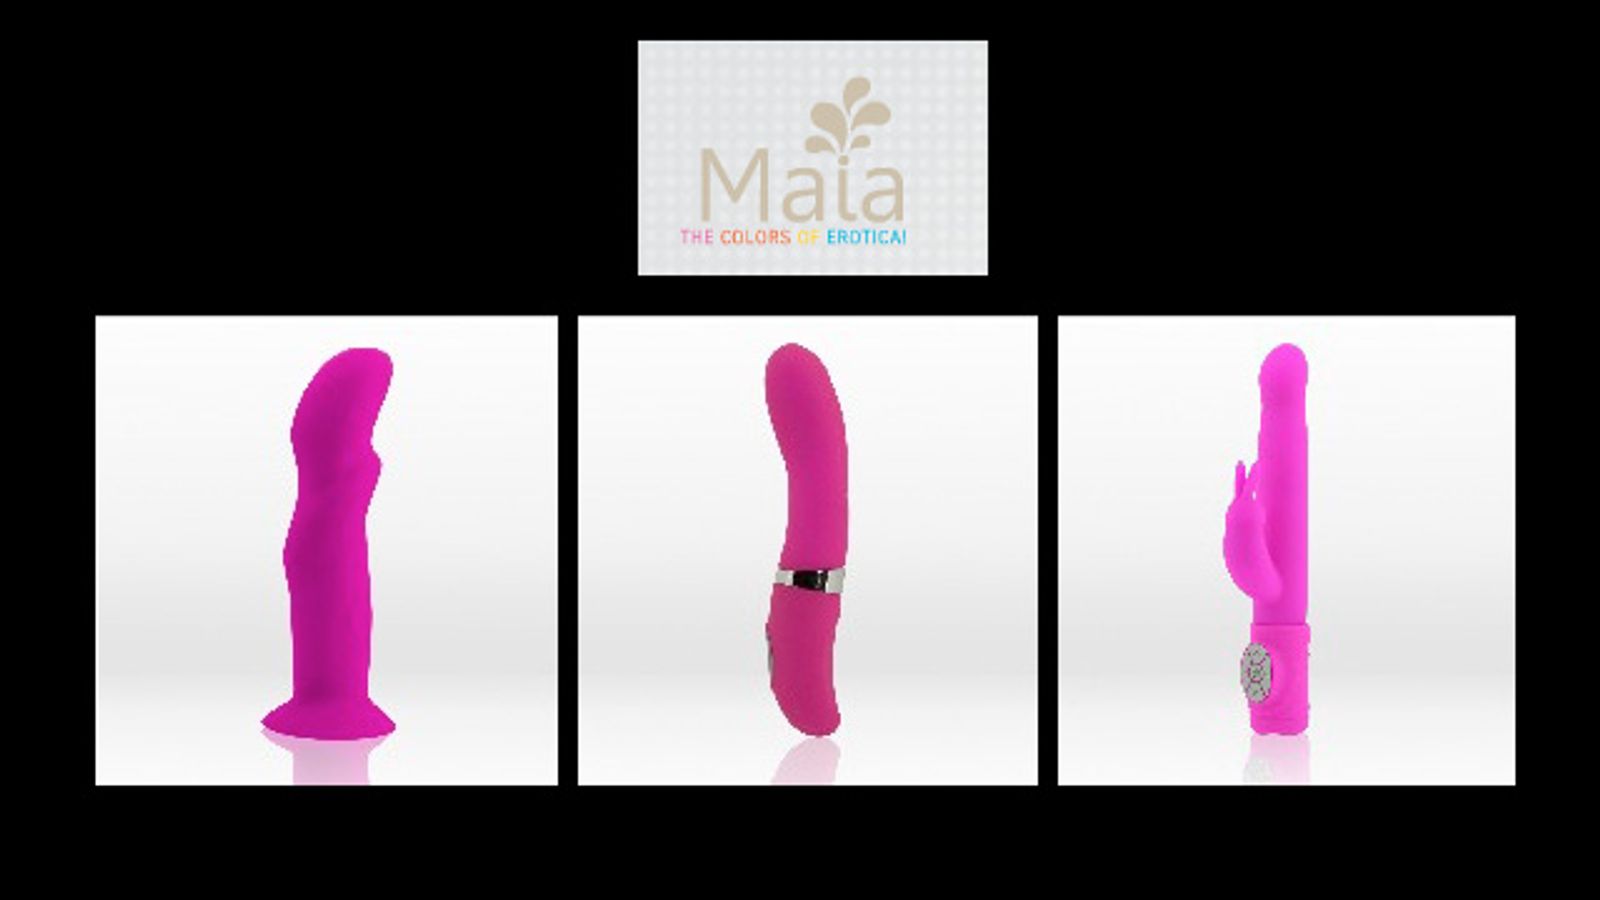 Introducing Maia: The Colors of Erotica